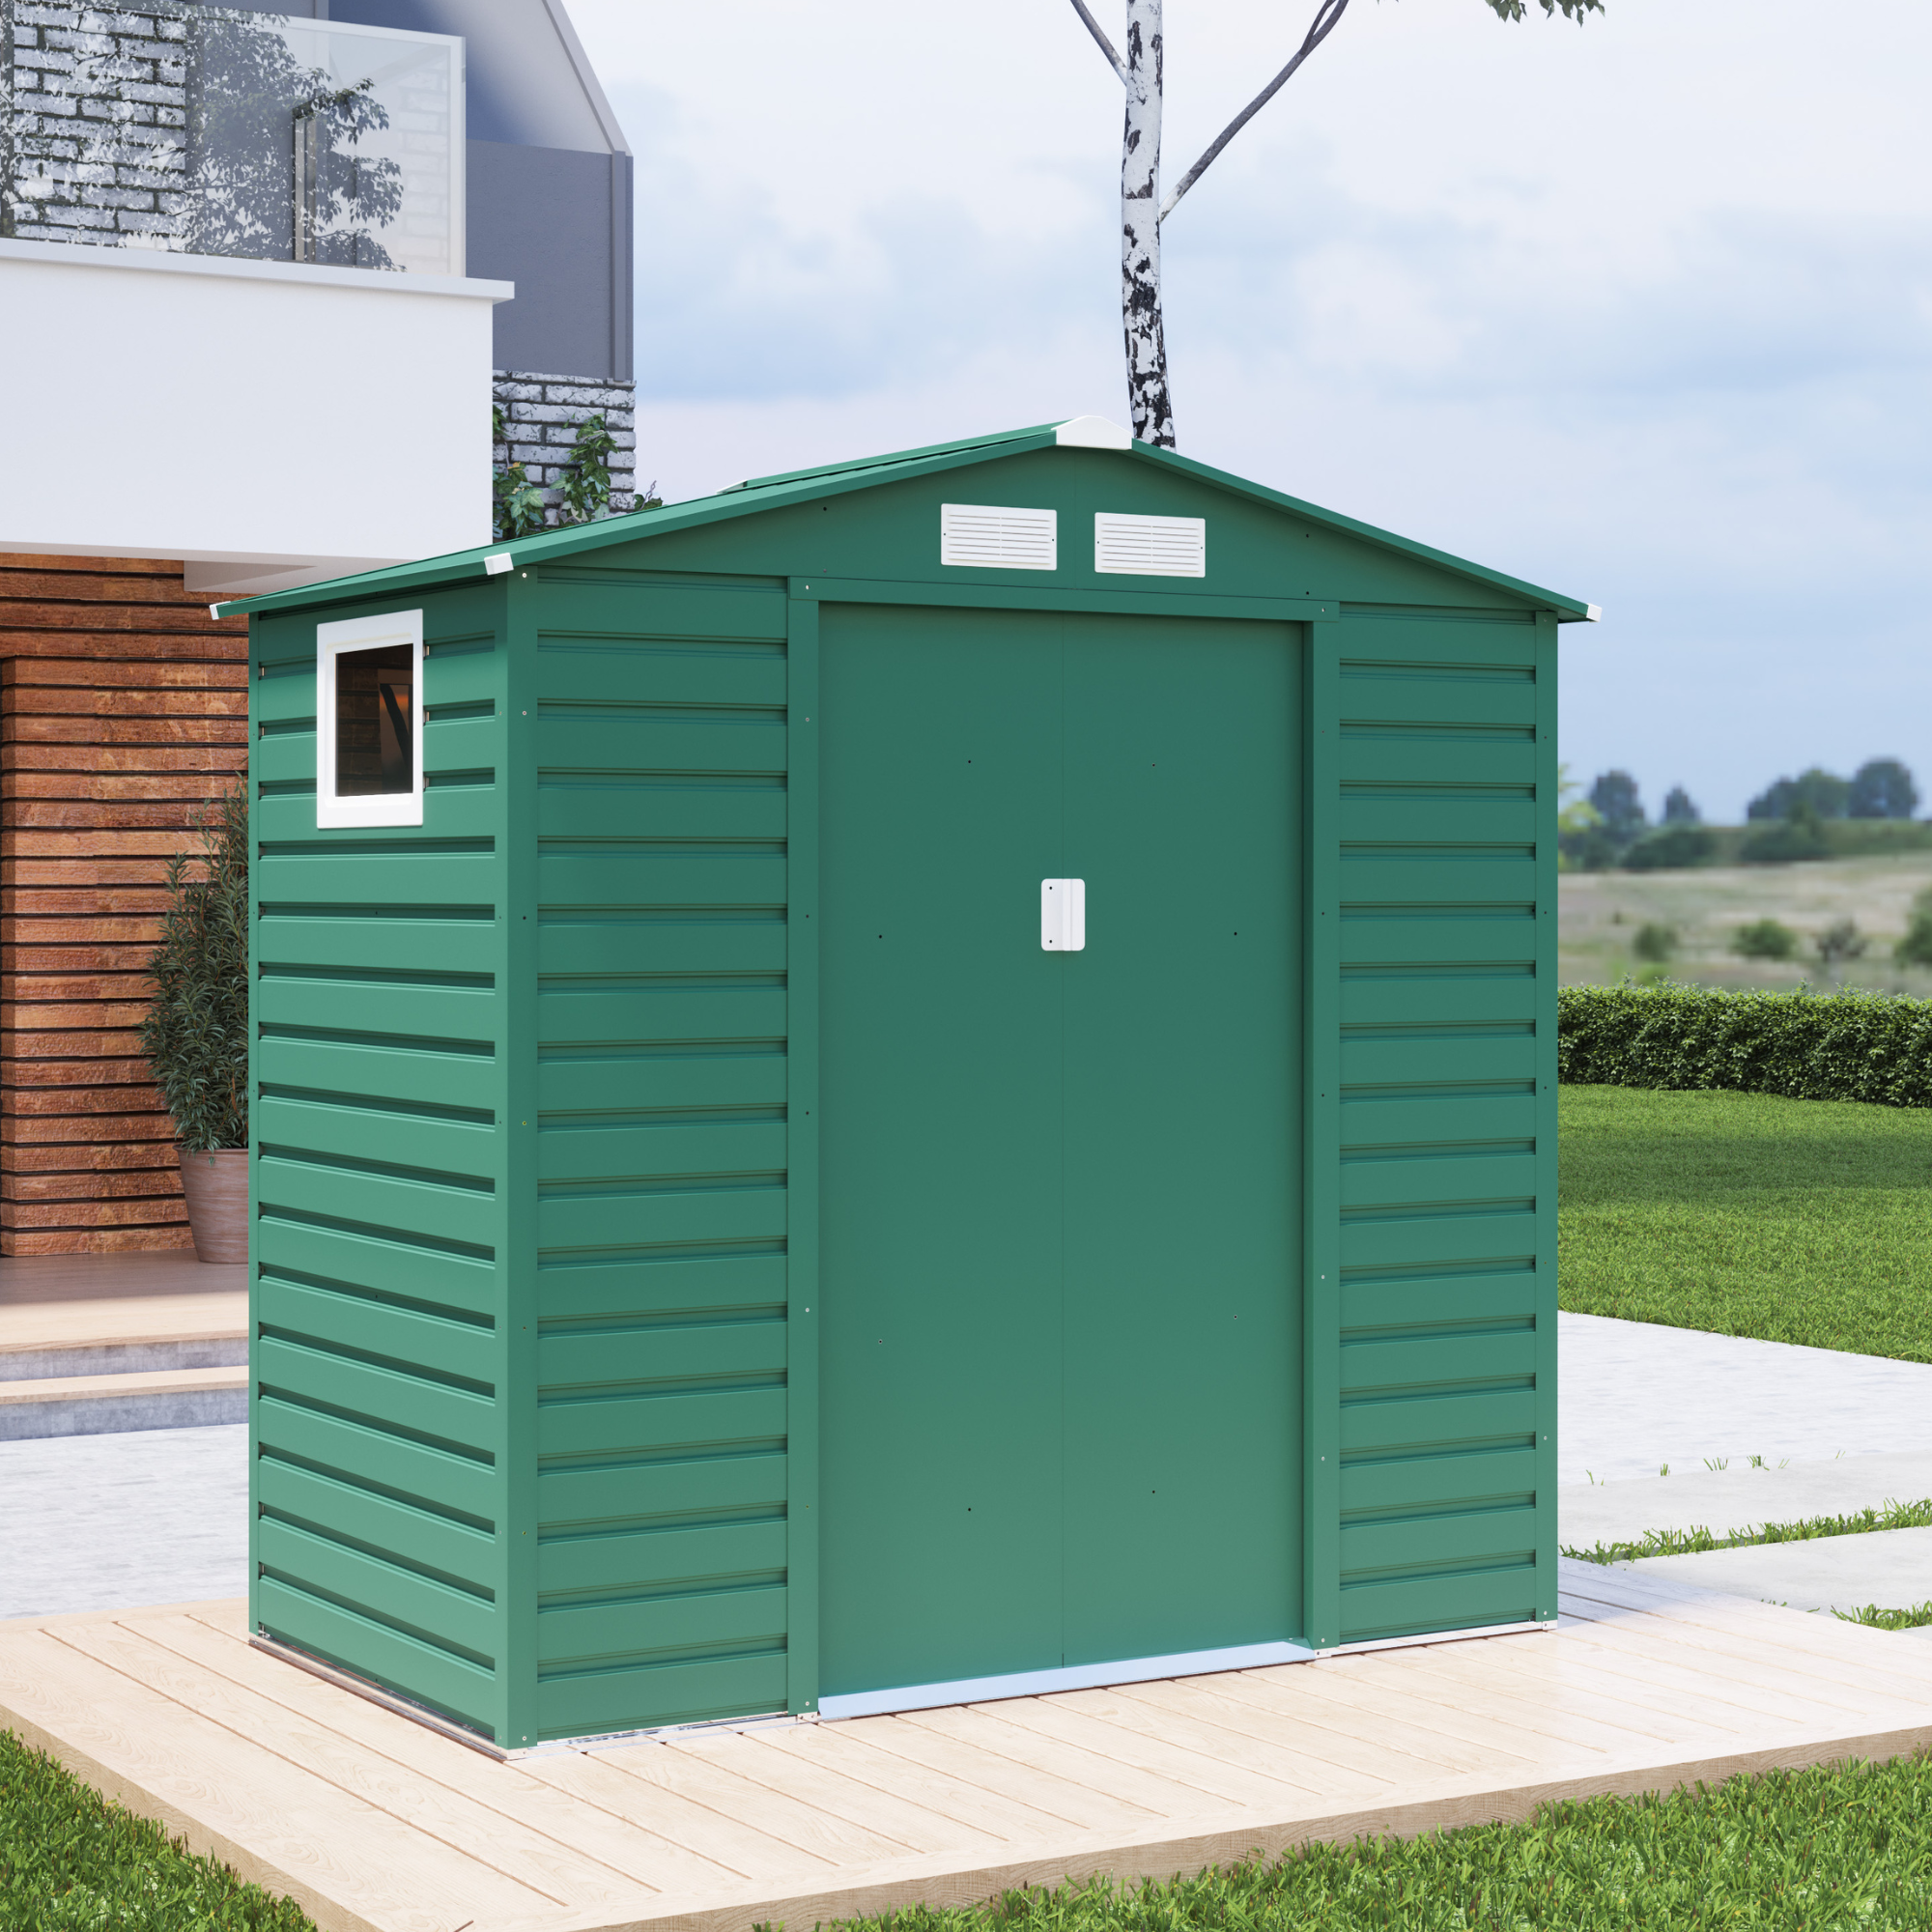 BillyOh Upton Apex Metal Shed - 7x4ft Green from BillyOh